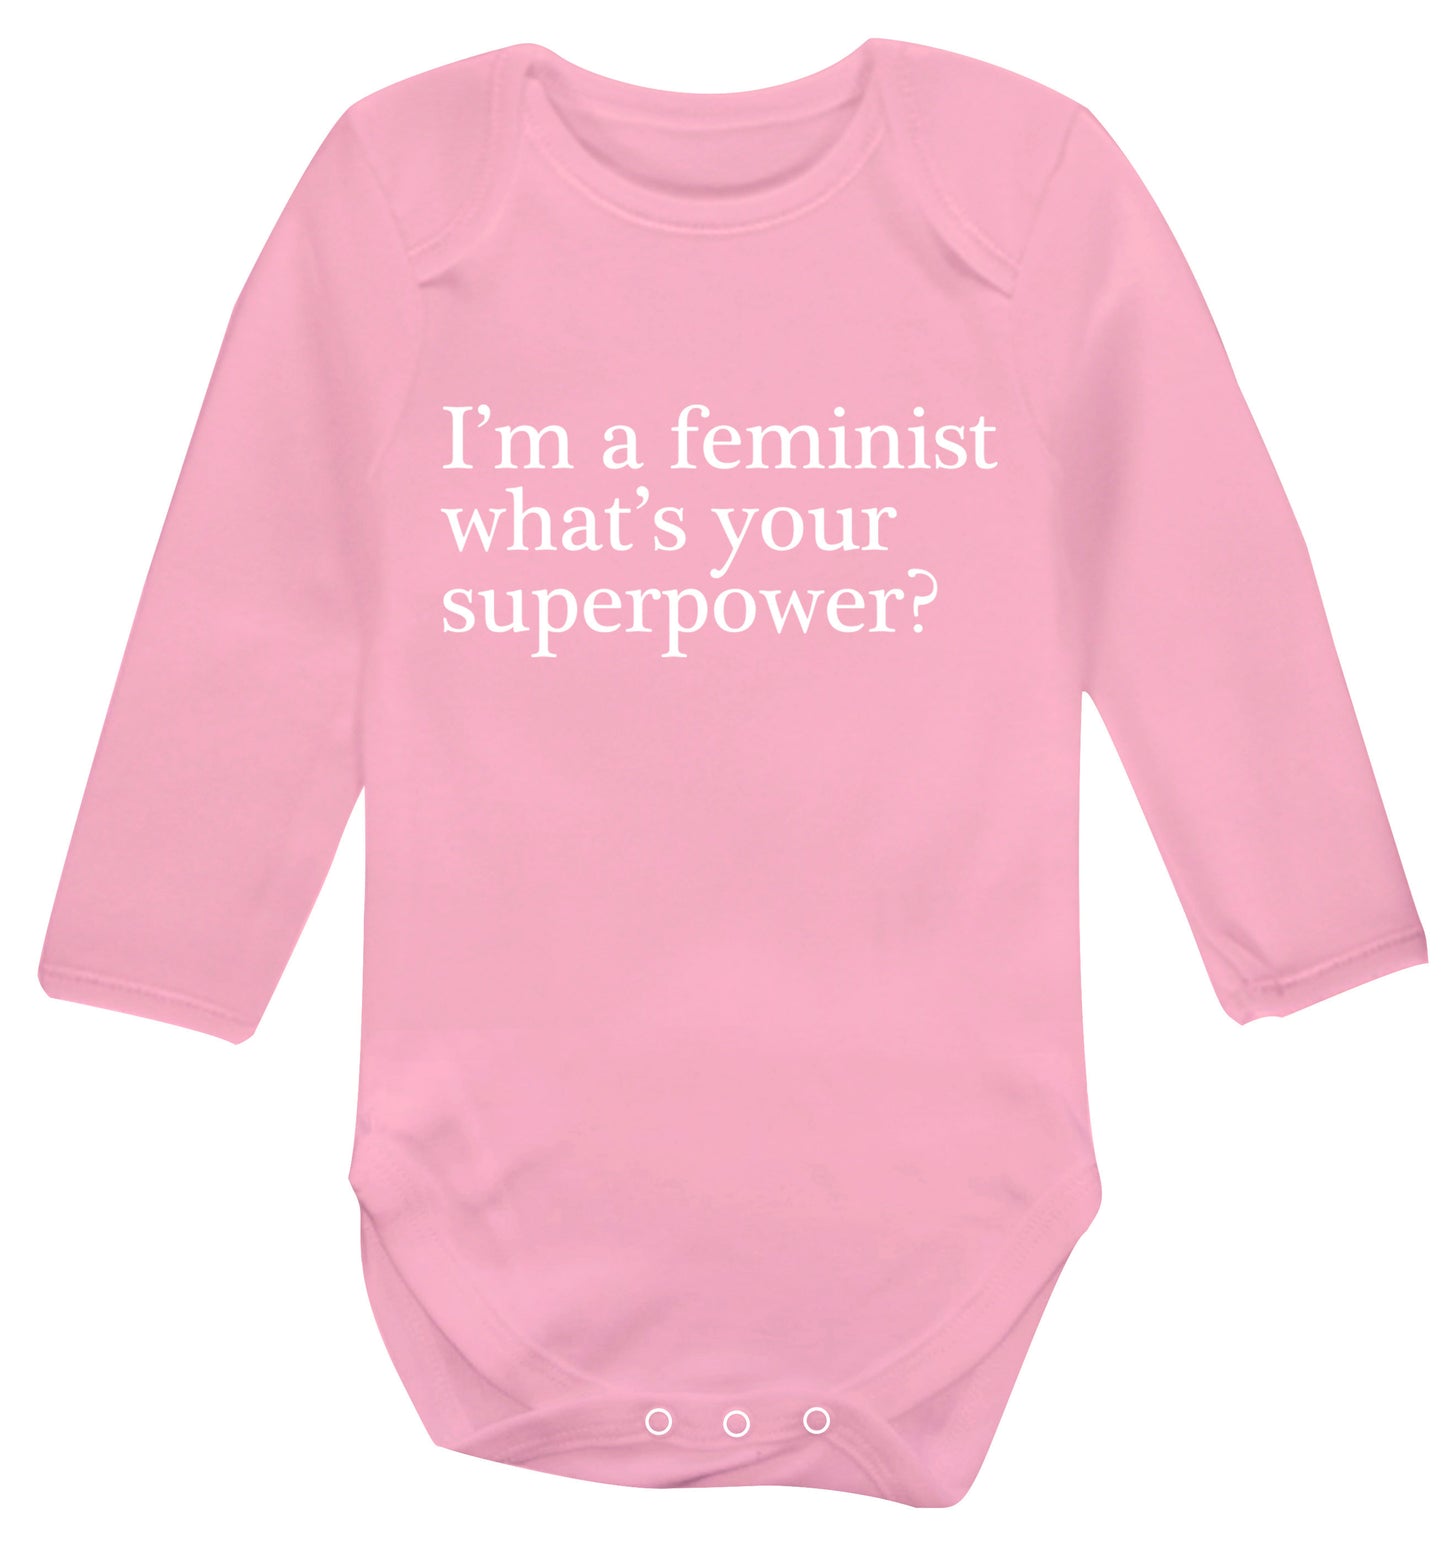 I'm a feminist what's your superpower? Baby Vest long sleeved pale pink 6-12 months